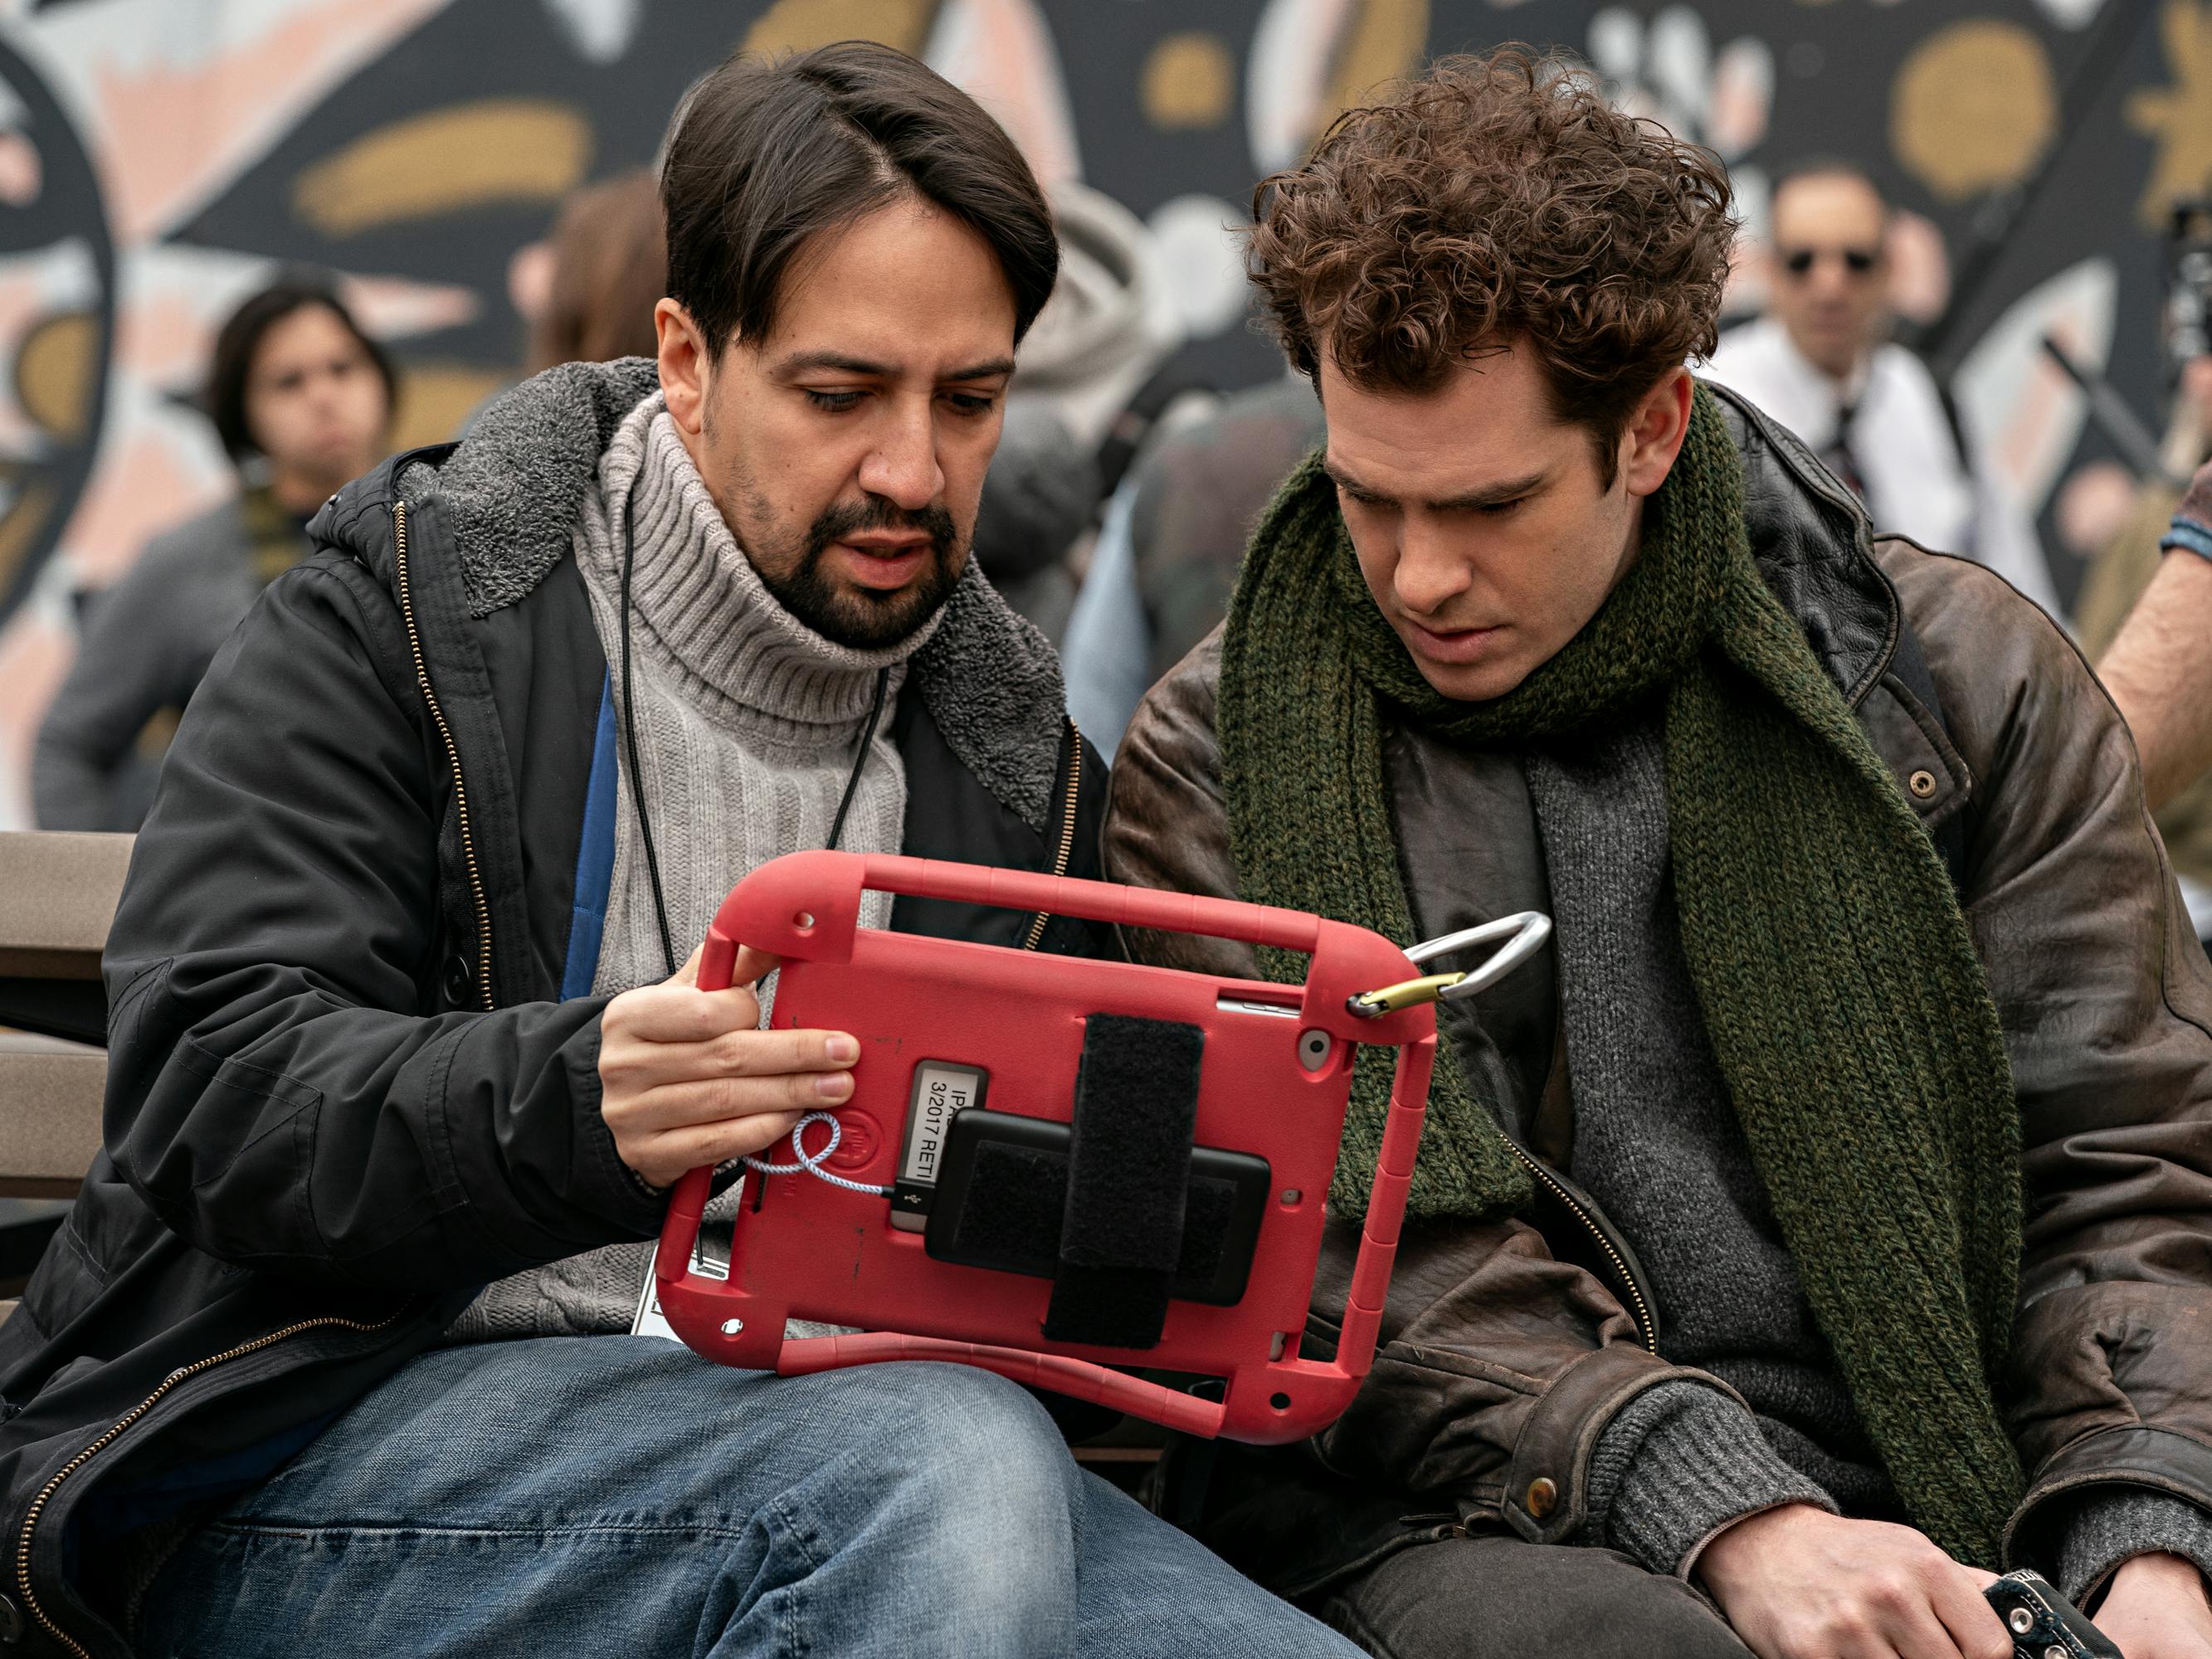 Lin-Manuel Miranda and Andrew Garfield look at footage on a small red ipad. 